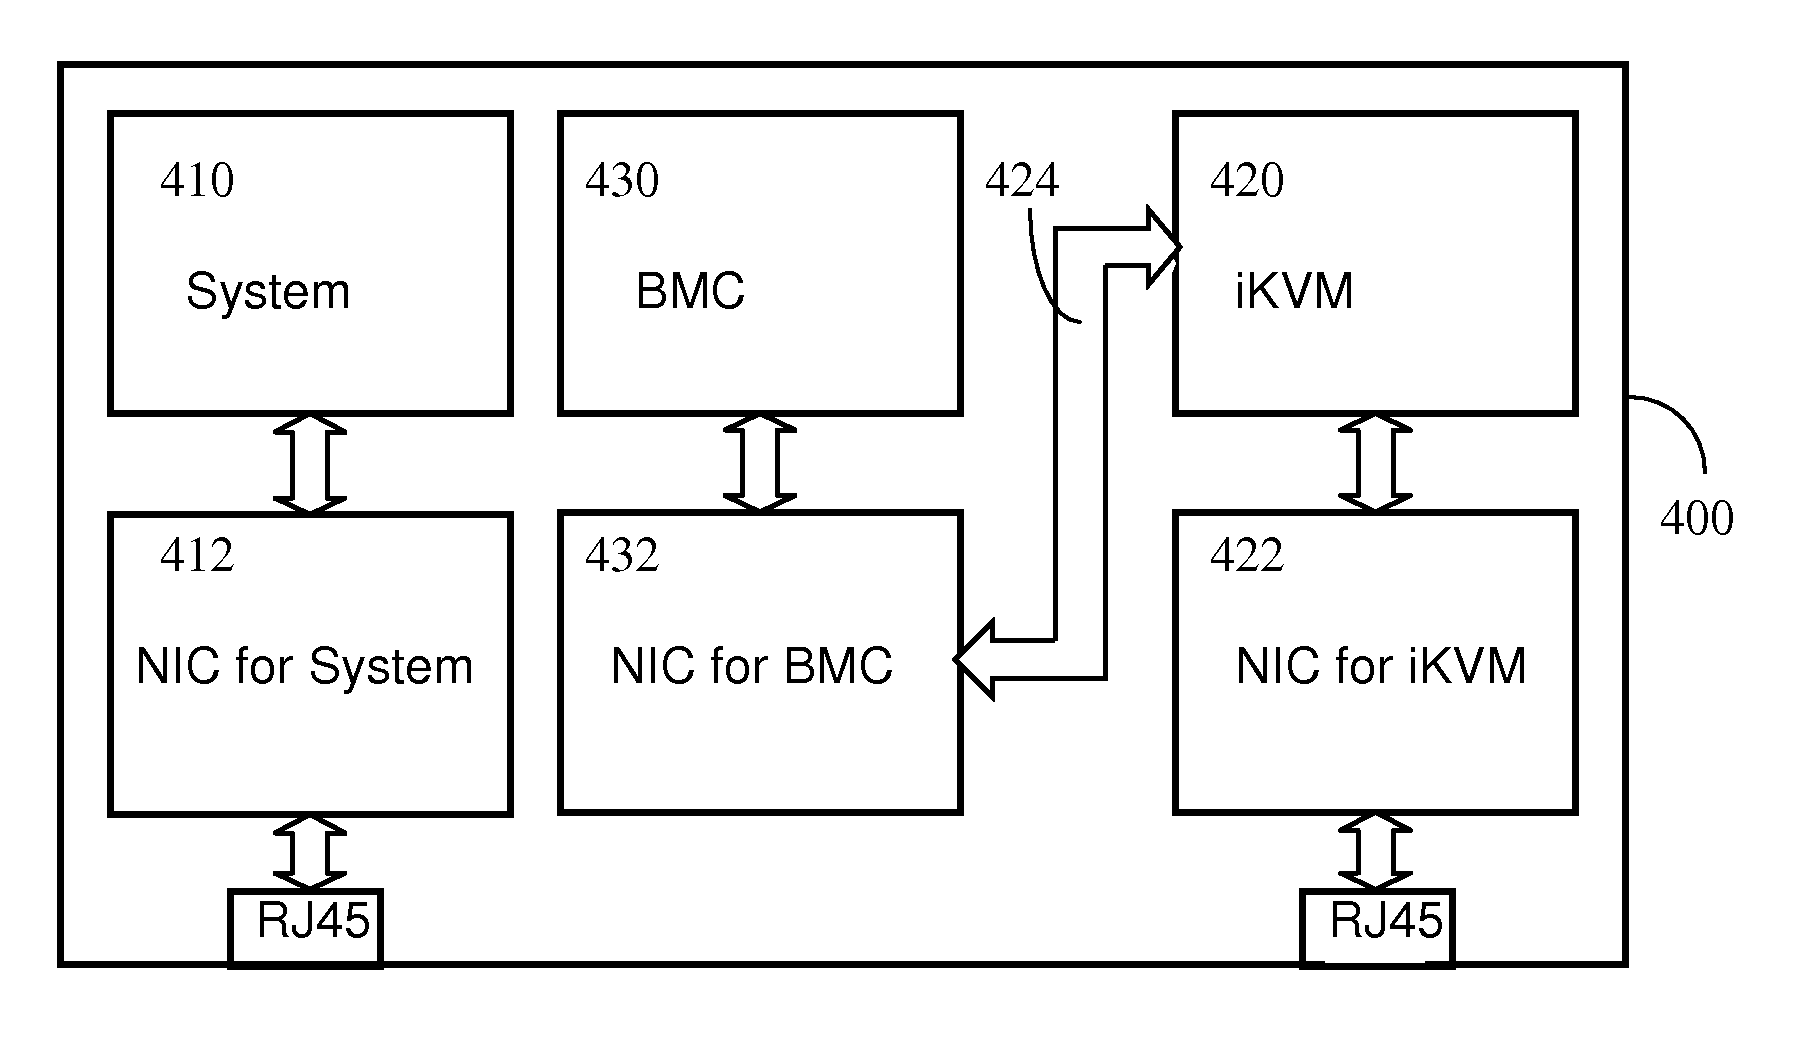 Server with network-based remote access and server management functions using reduced number of network connections